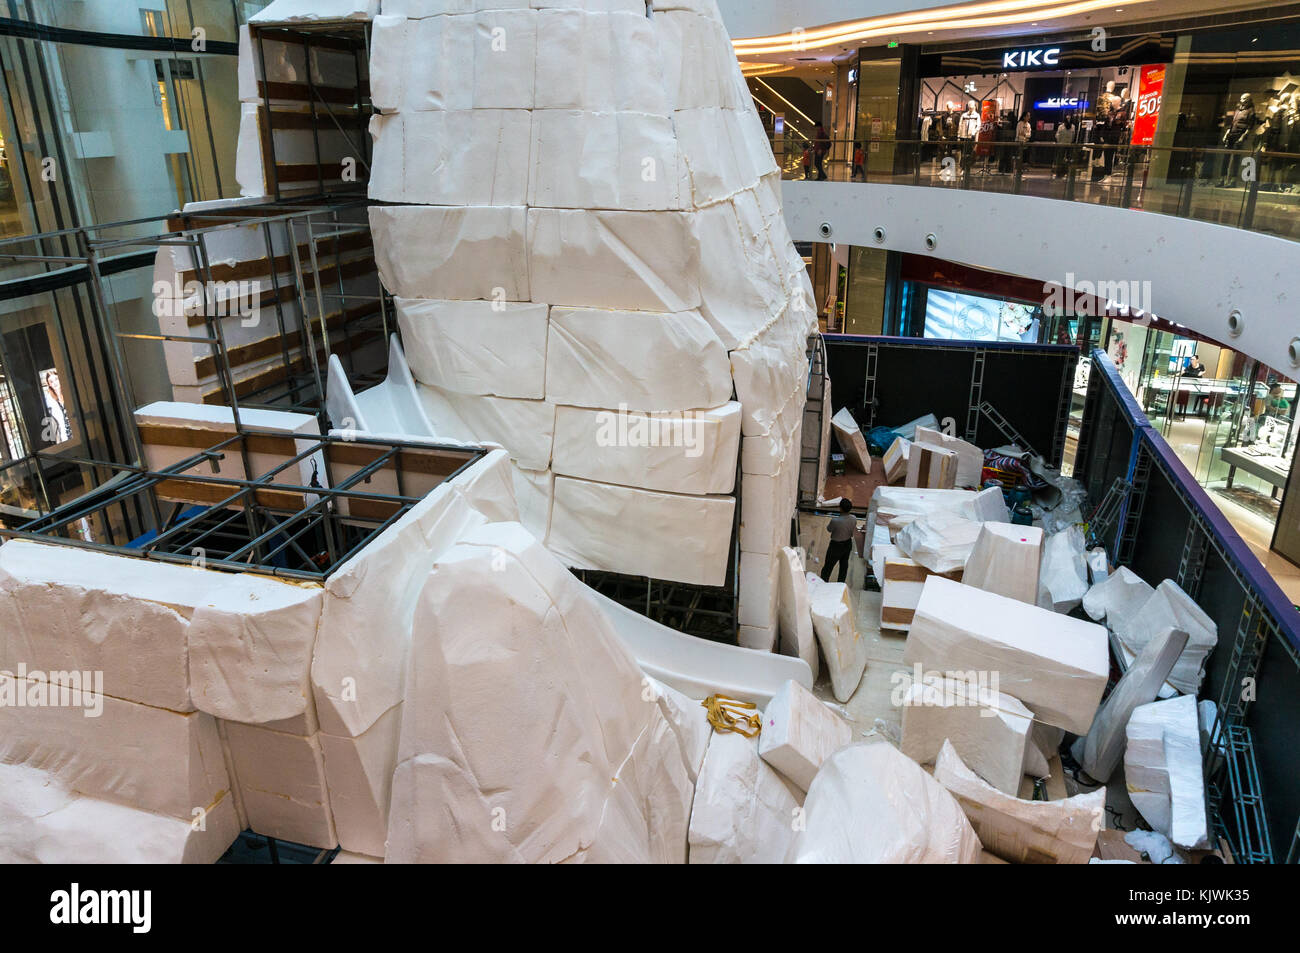 Builders assembling a snow mountain for Christmas at a shopping centre in Shenzhen, China Stock Photo